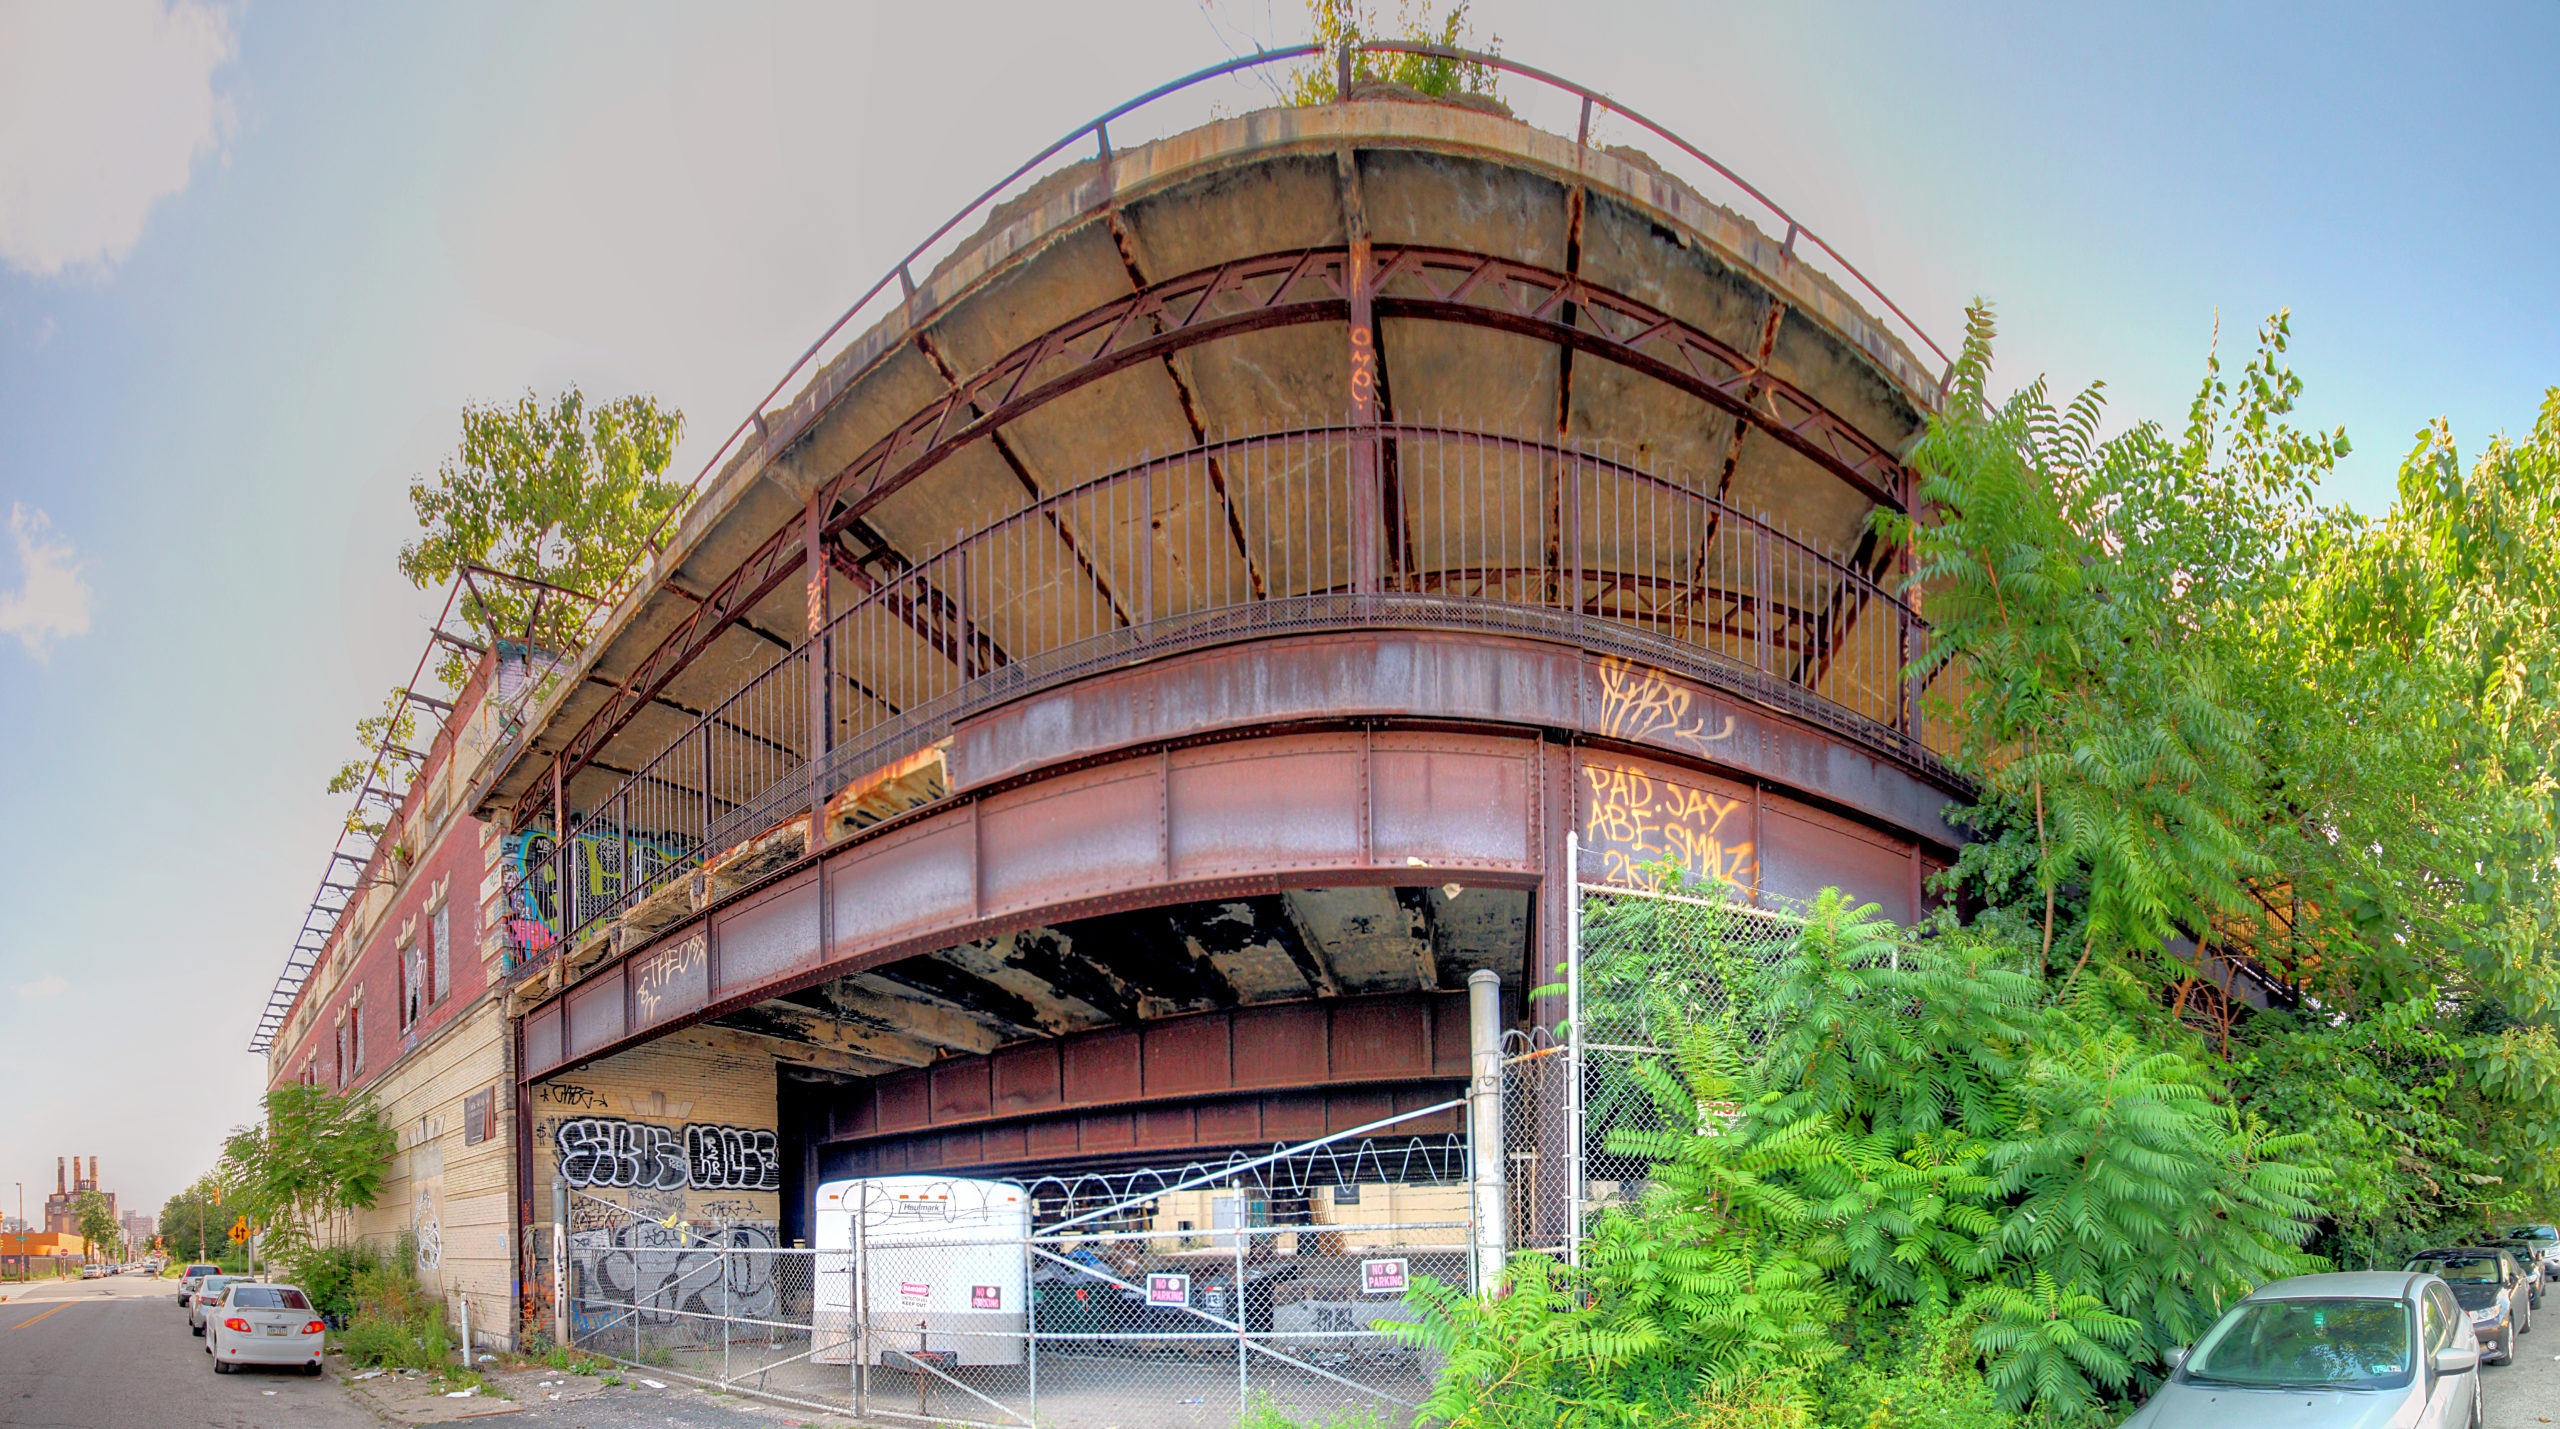 Green Street Station (abandoned) 531 N 9th St Philadelphia, PA Copyright 2020, Bob Bruhin. All rights reserved.